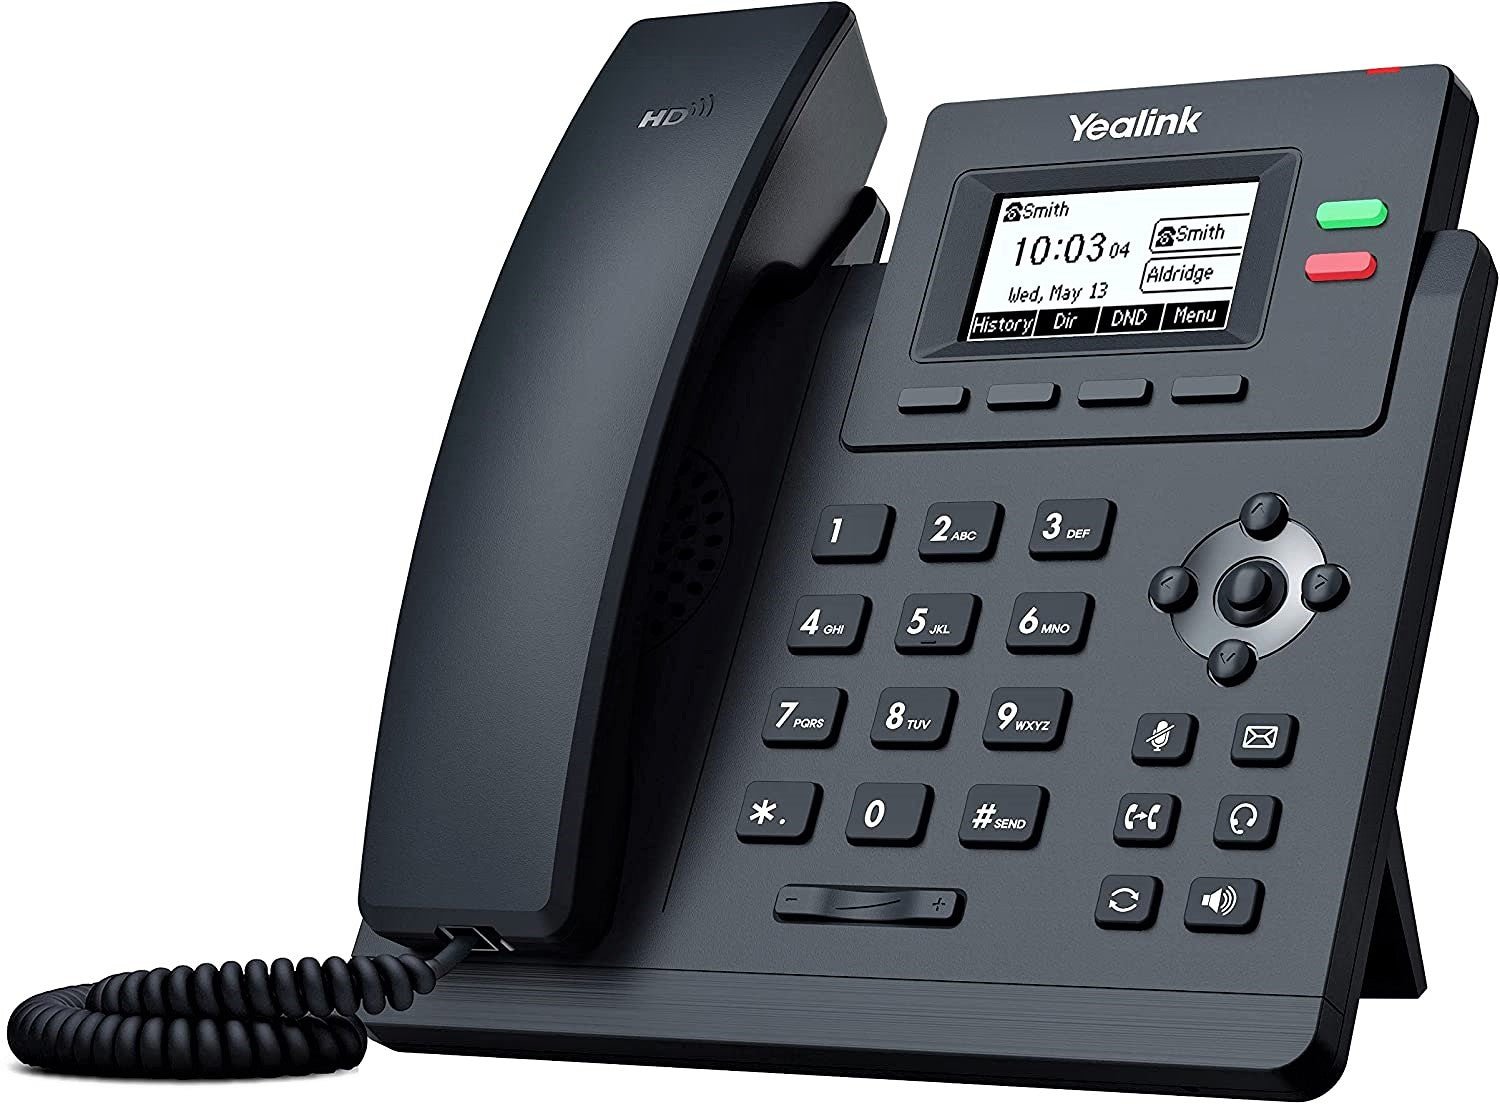 Yealink SIP T31G Entry Level HD Gigabit IP Corded Phone with Extra Large Graphical Pixel Backlit LCD Display (132 x 64) - Black